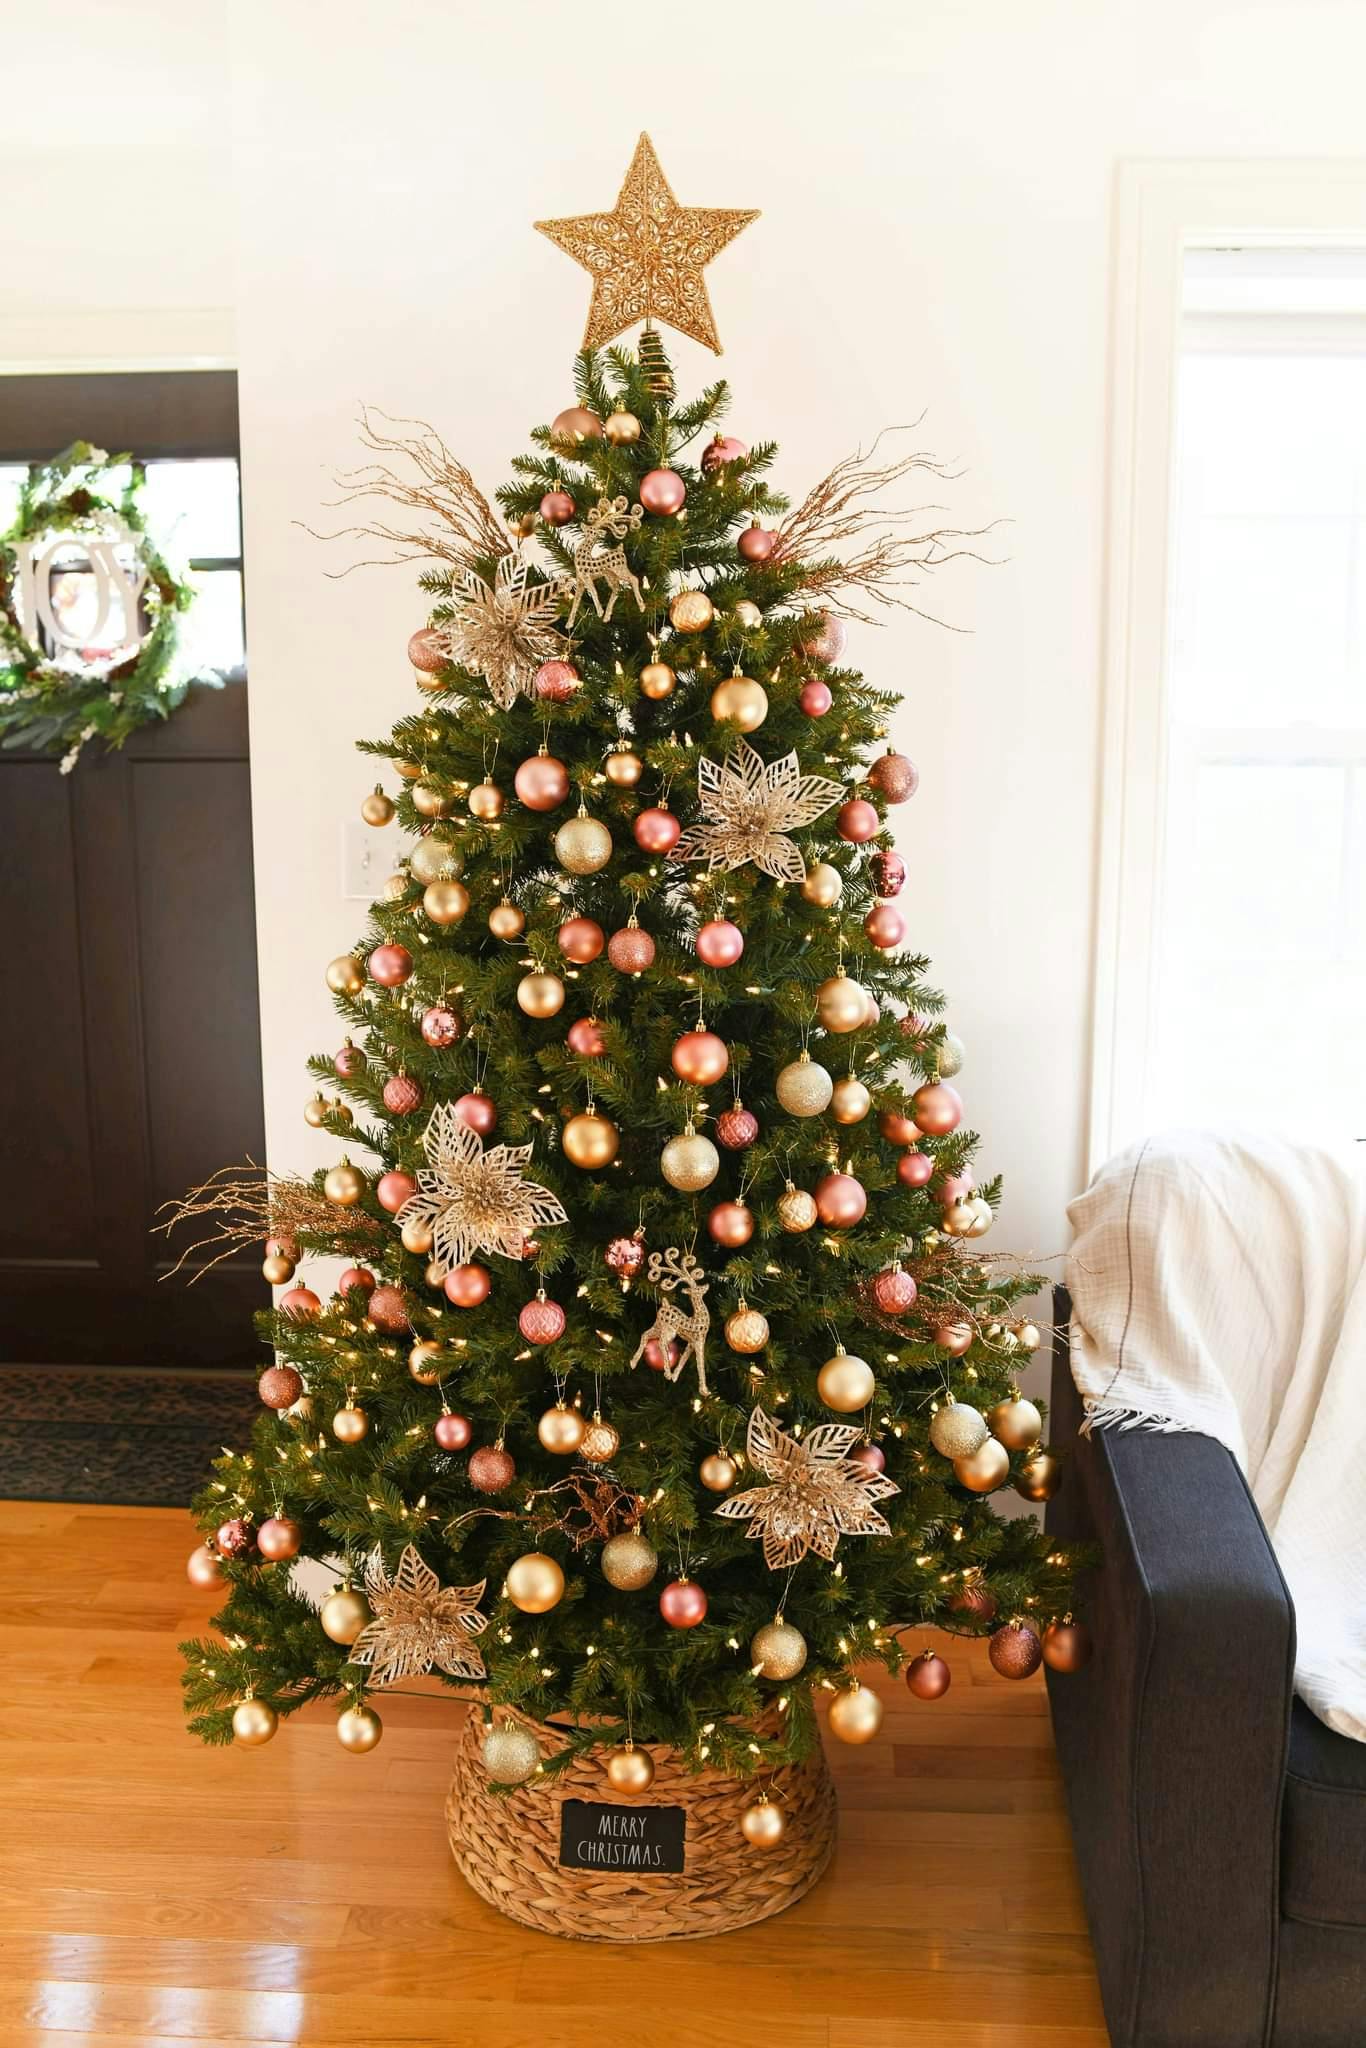 Christmas tree decorated with rose gold and pink ornaments in a home with wood floor.